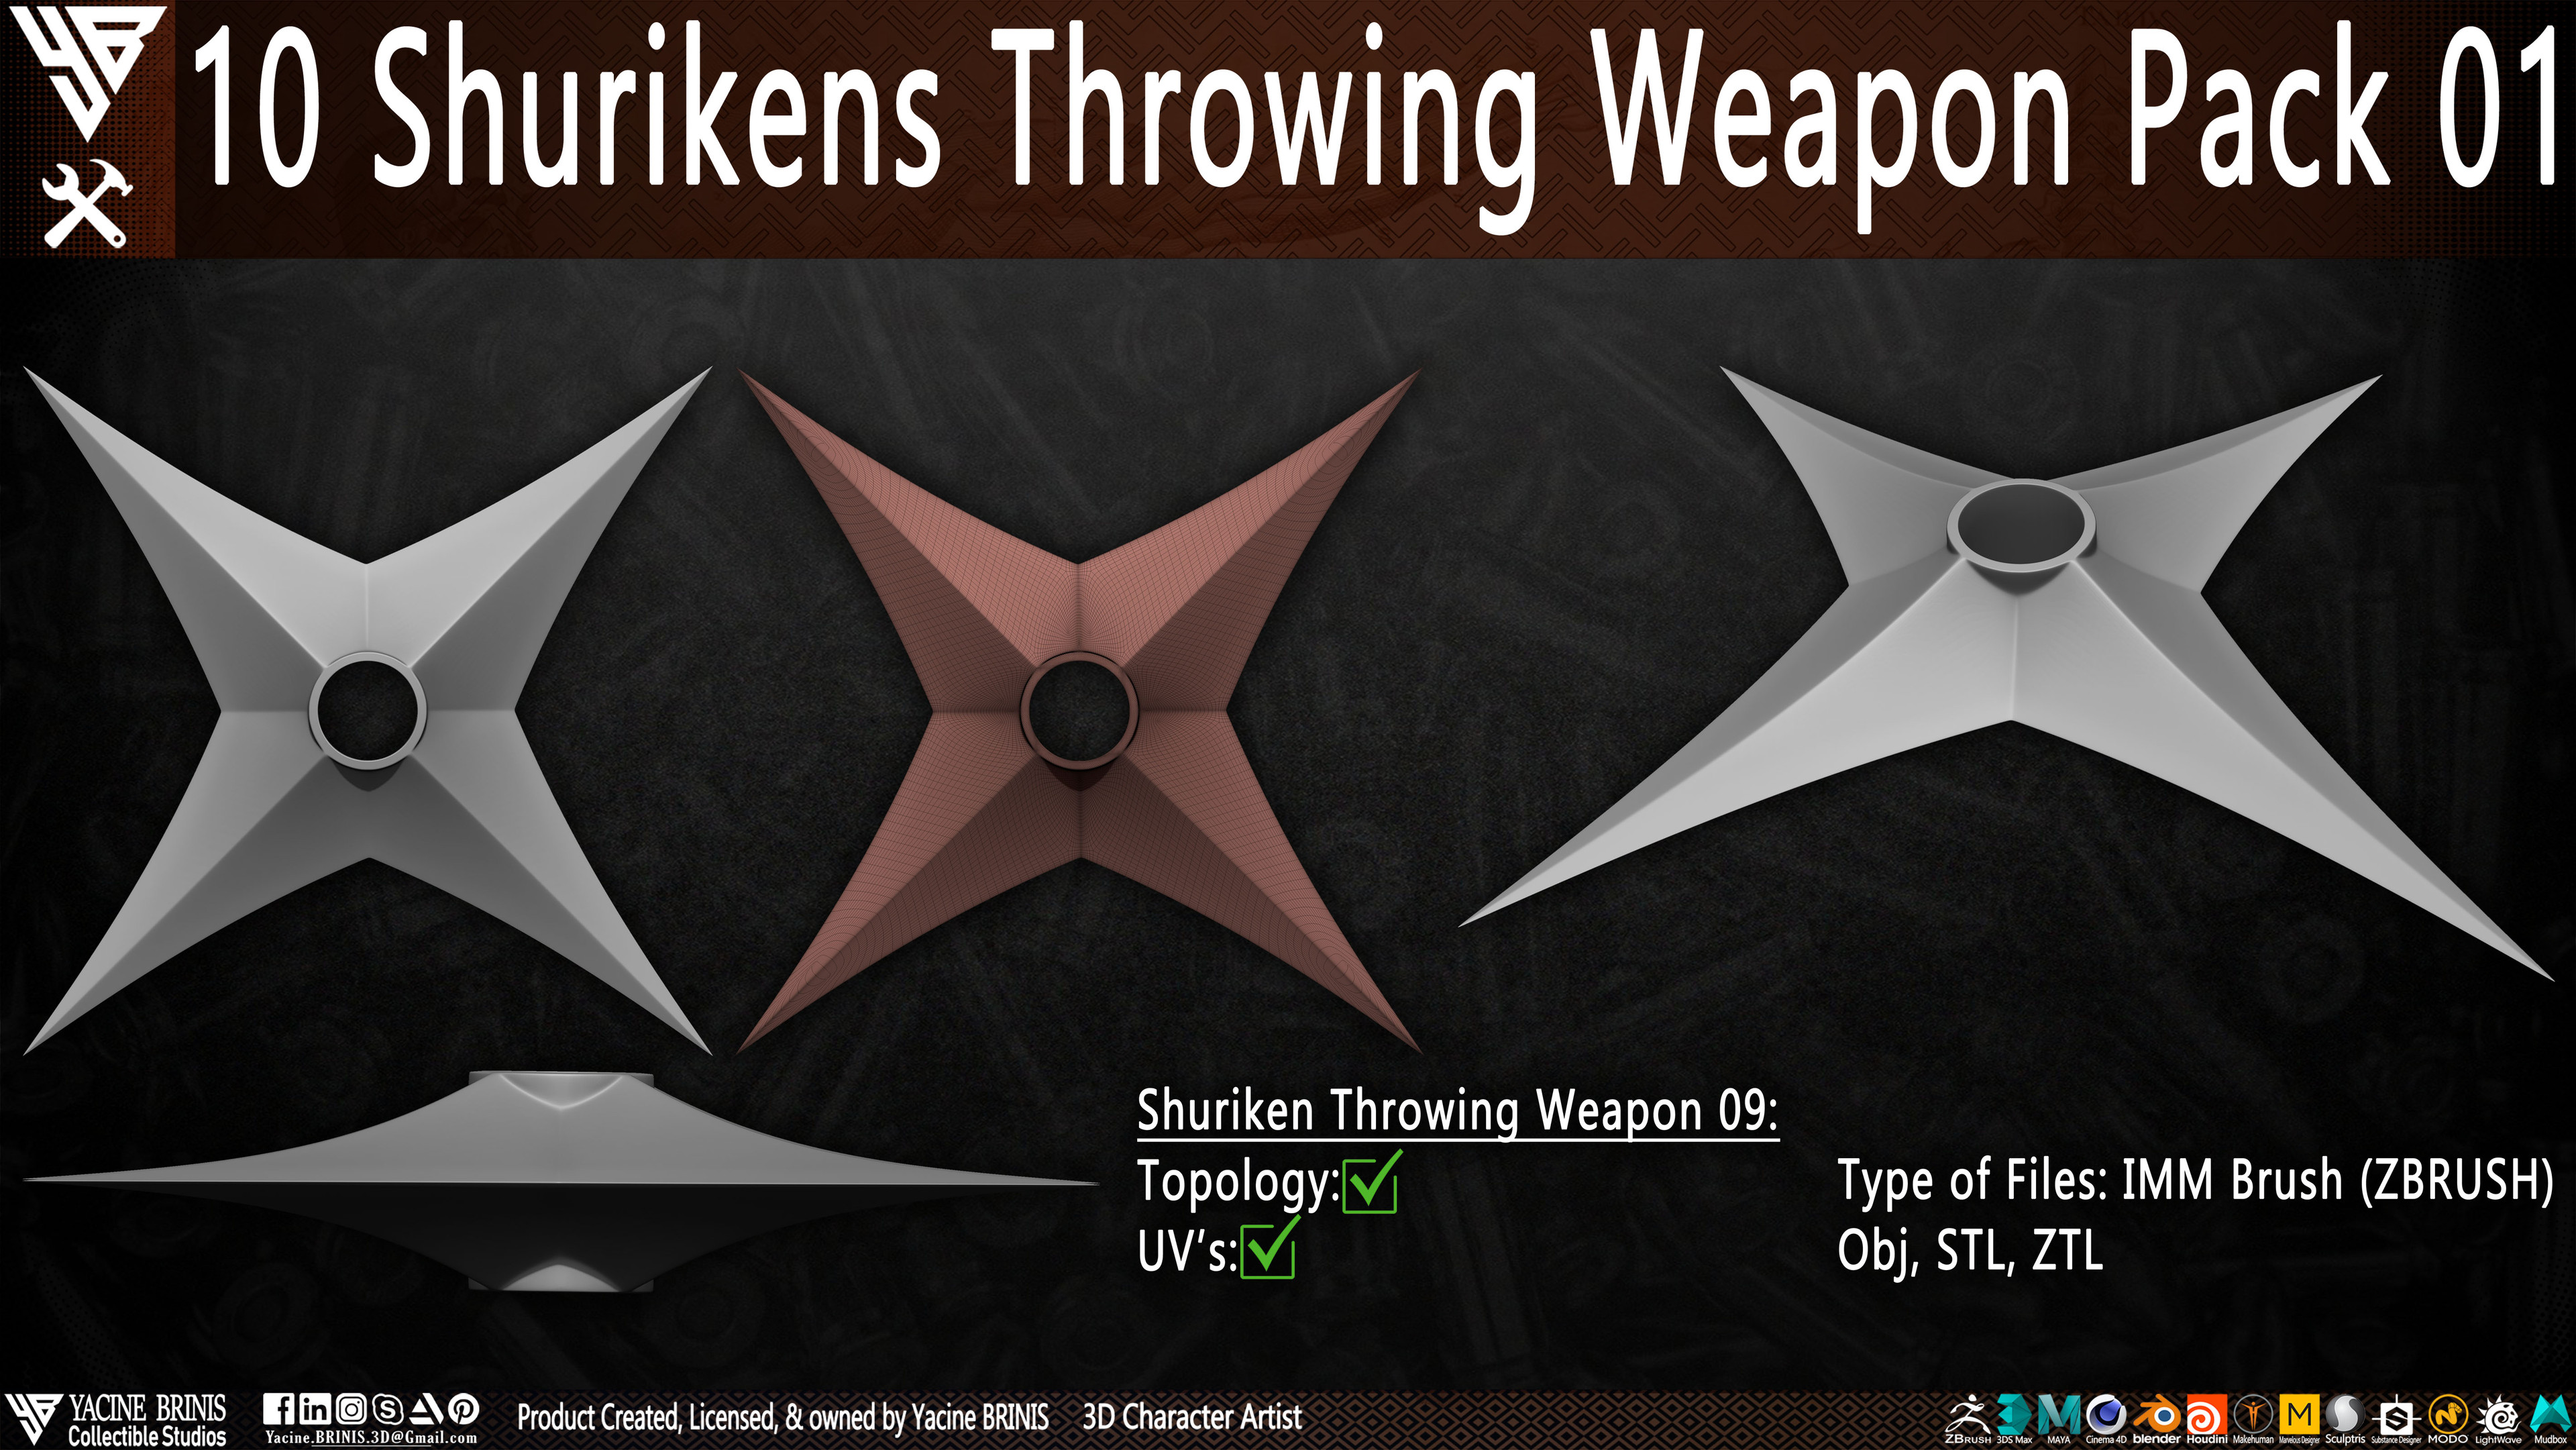 10 Shurikens Throwing Weapon Pack 01 sculpted by Yacine BRINIS Set 12